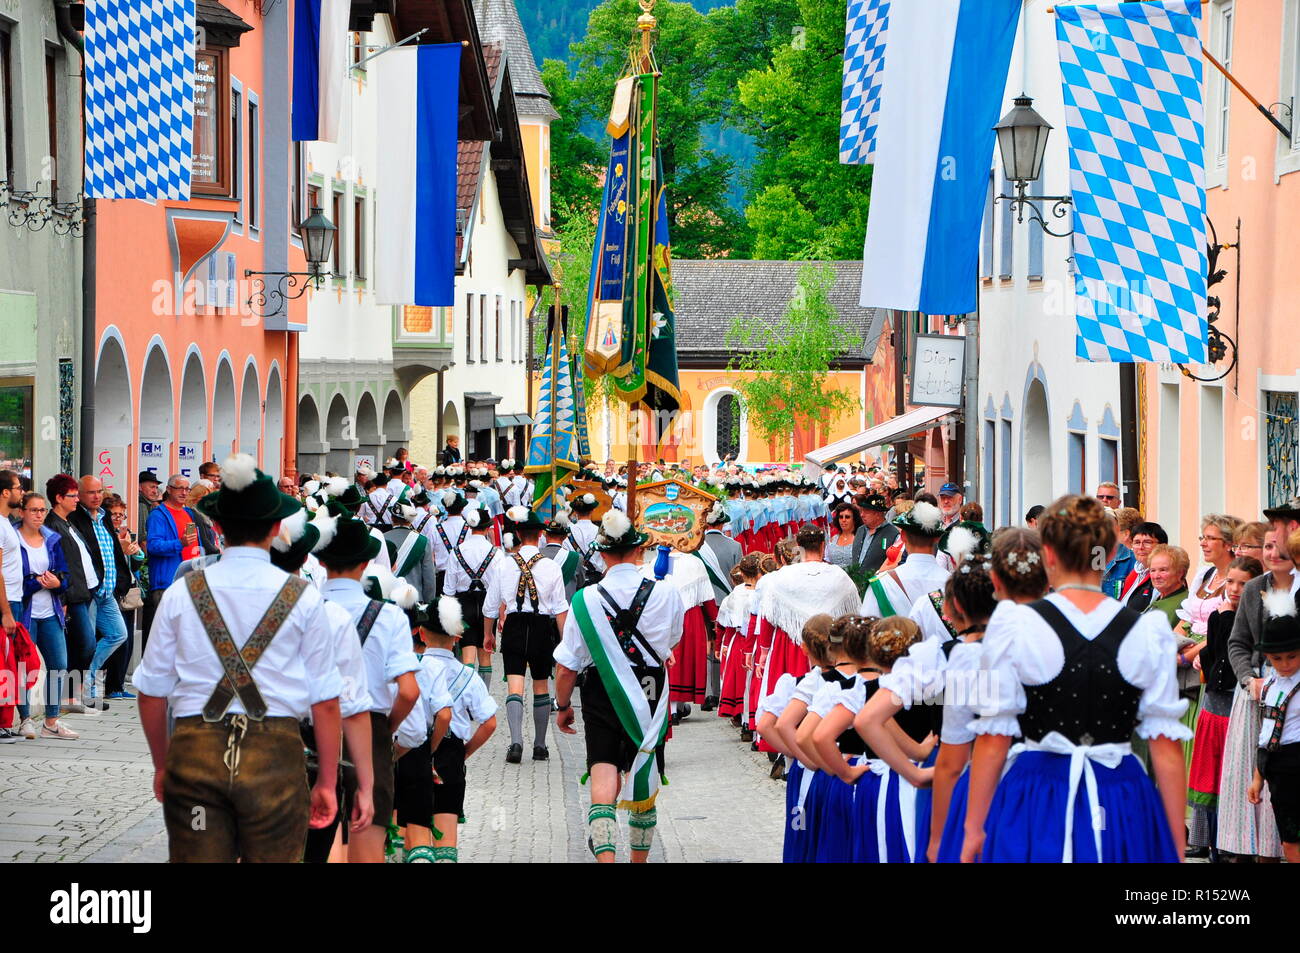 traditional costume parade, Werdenfels, Bavaria, Germany Stock Photo